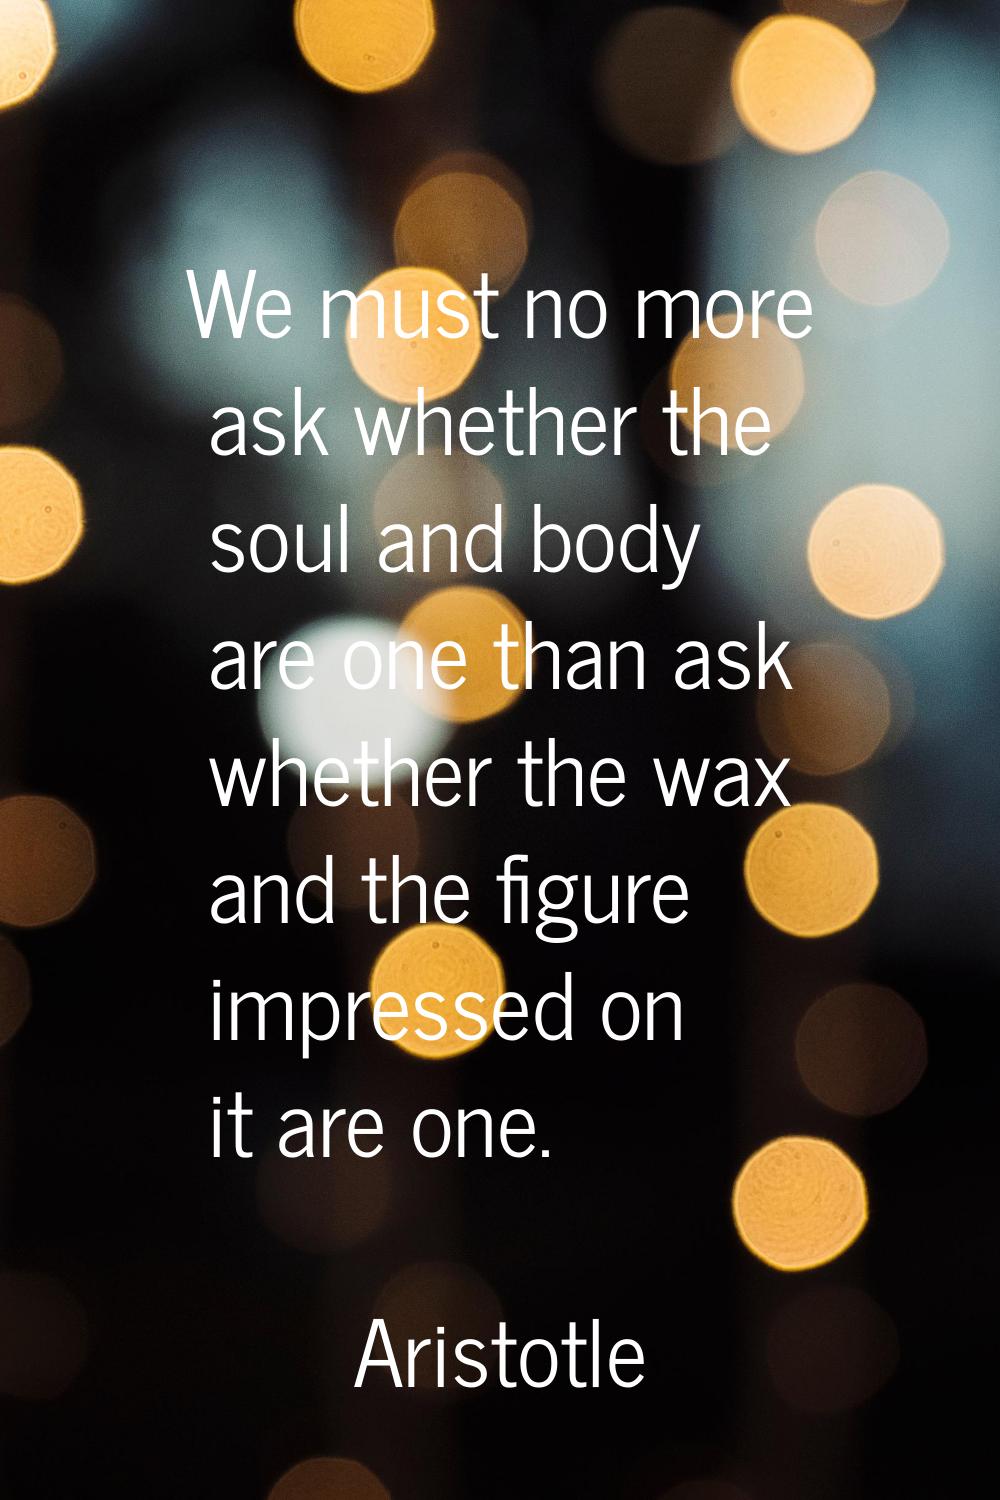 We must no more ask whether the soul and body are one than ask whether the wax and the figure impre